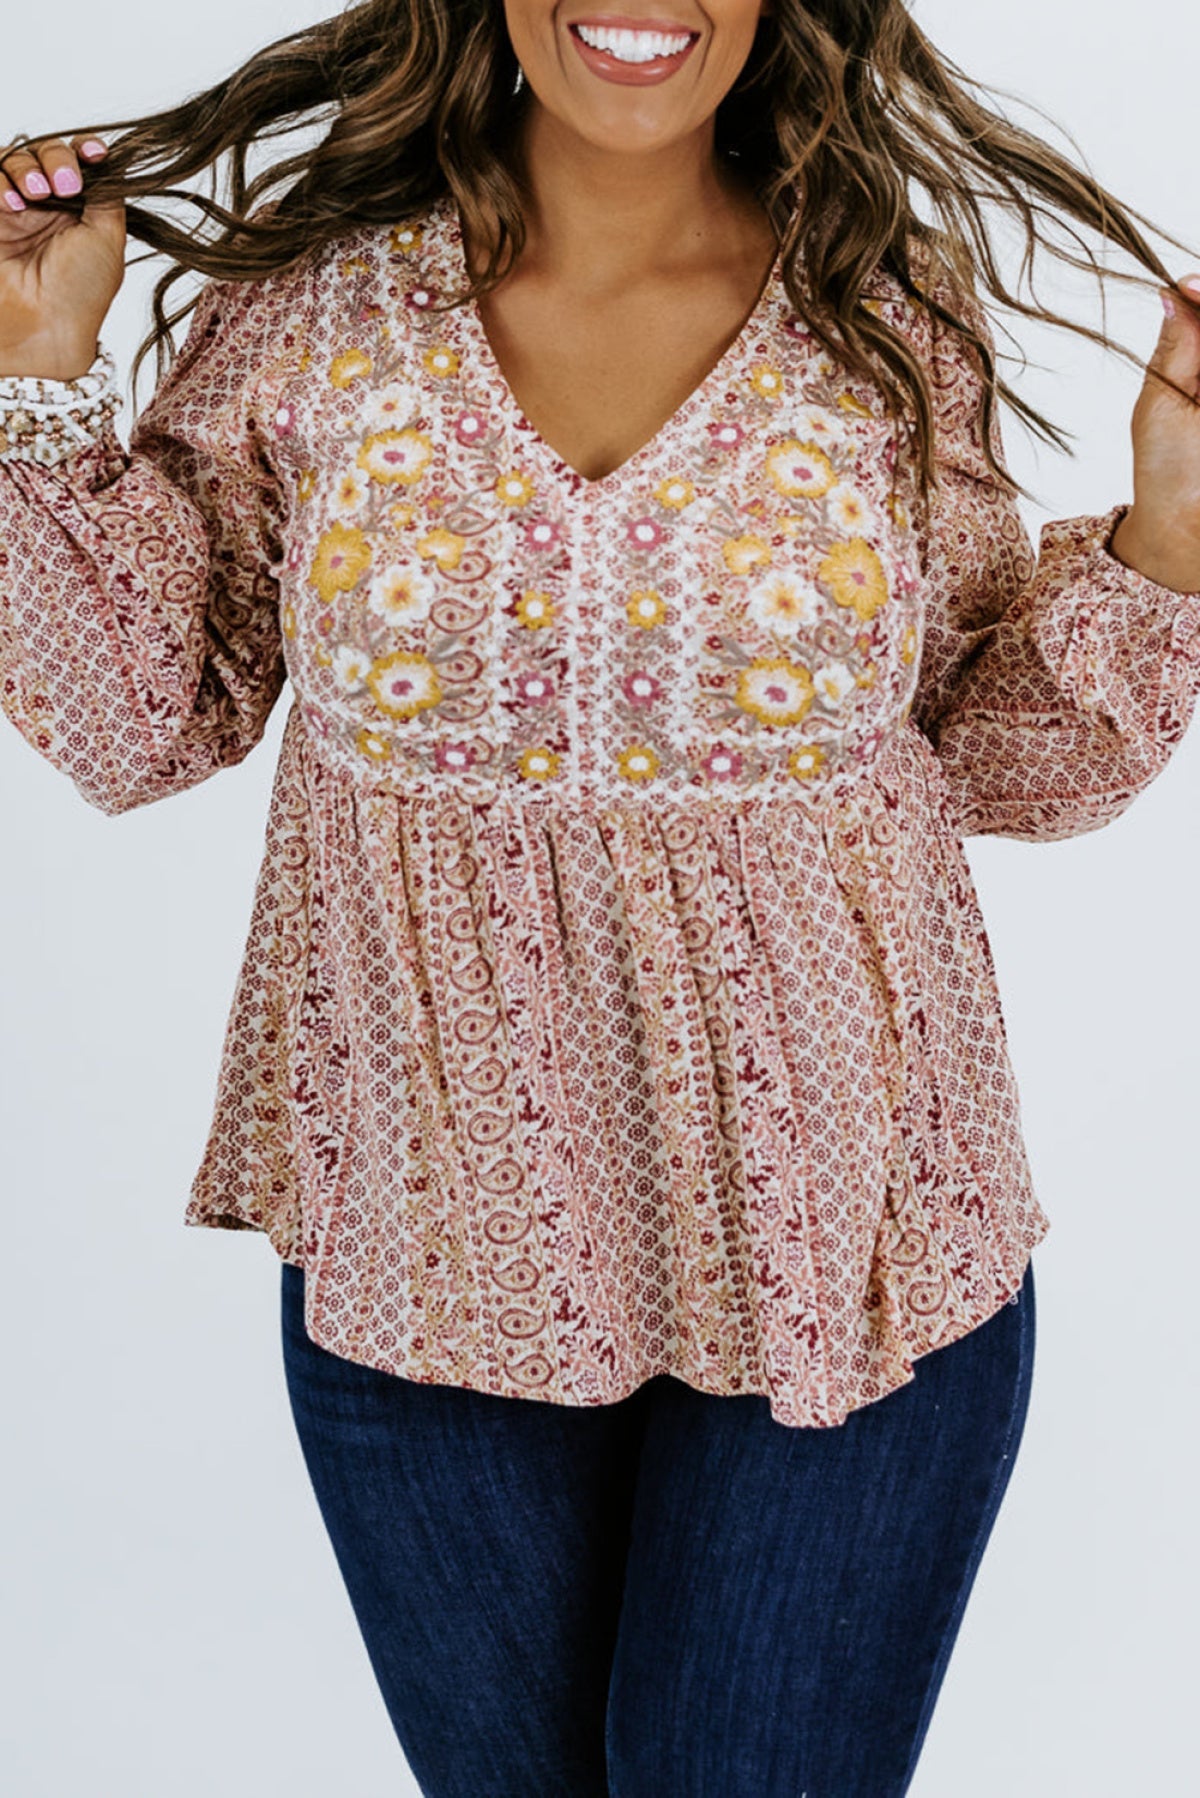 Floral Embroidered Plus Size Babydoll Blouse | Art in Aging